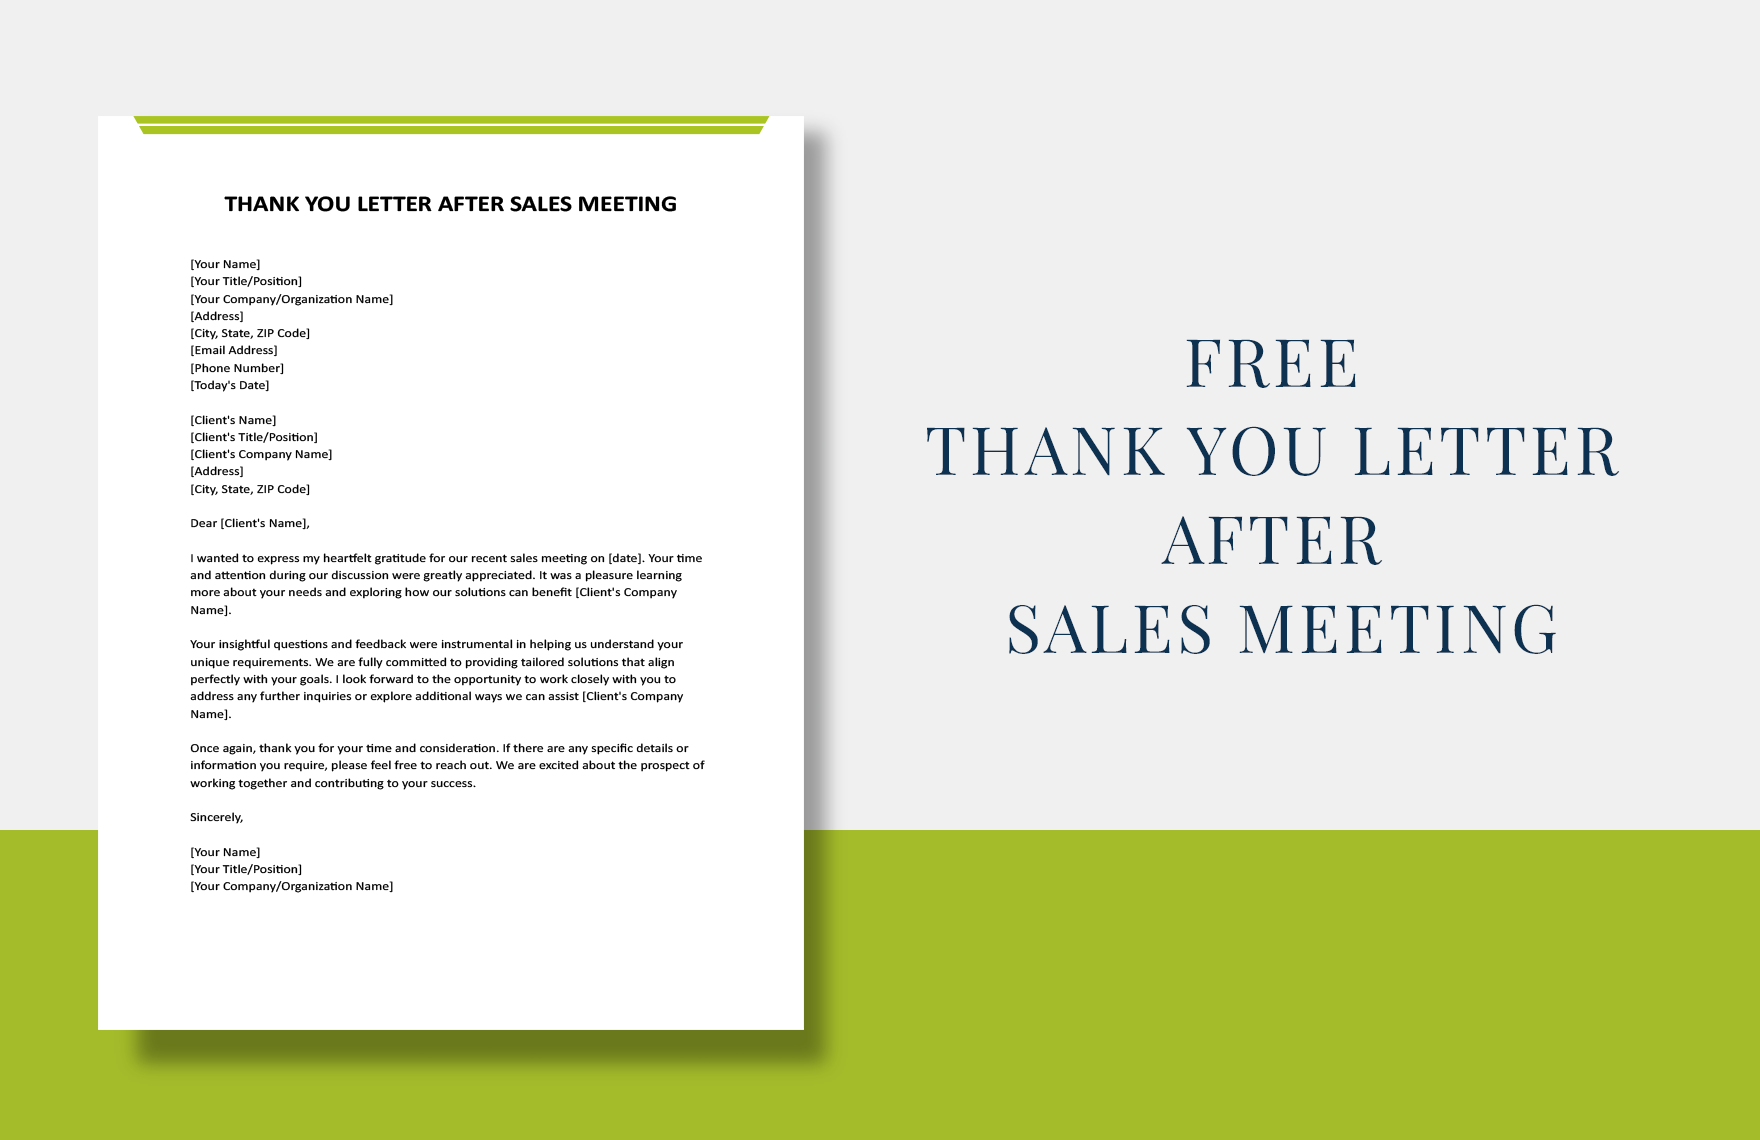 Free Thank You Letter After Sales Meeting in Word, Google Docs